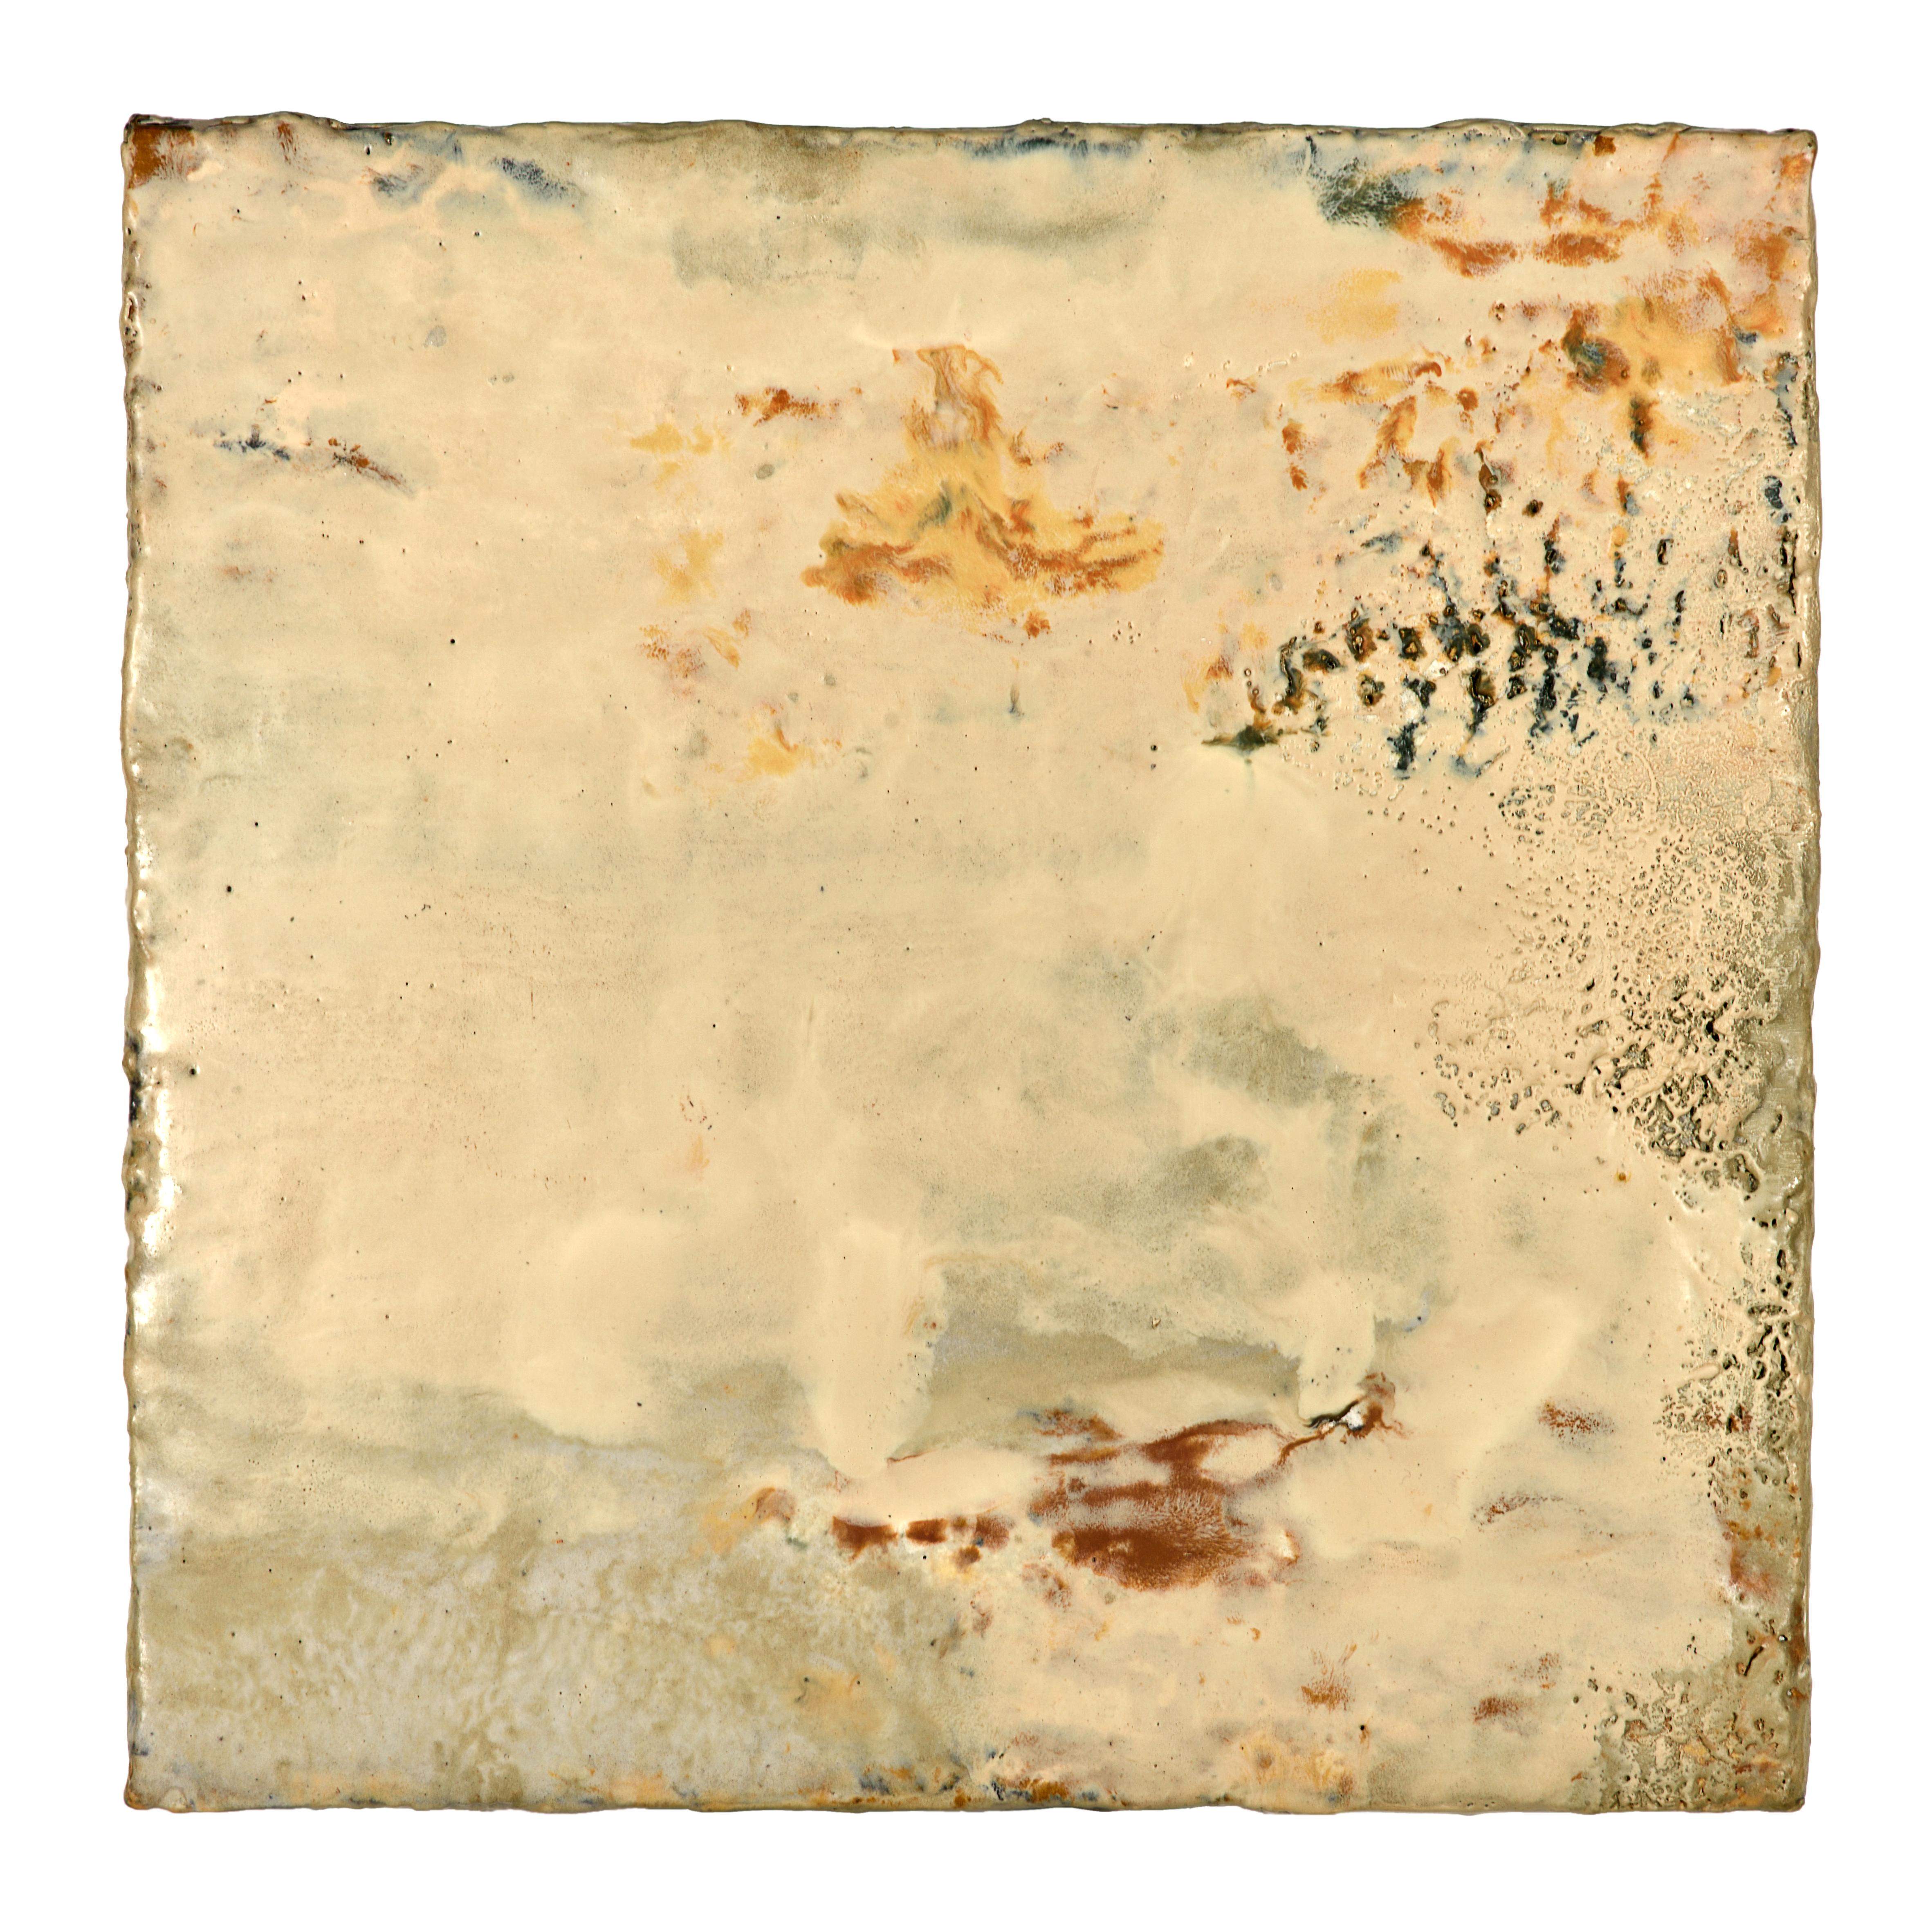 Contemporary Richard Hirsch Encaustic Painting of Nothing #26, 2012 For Sale